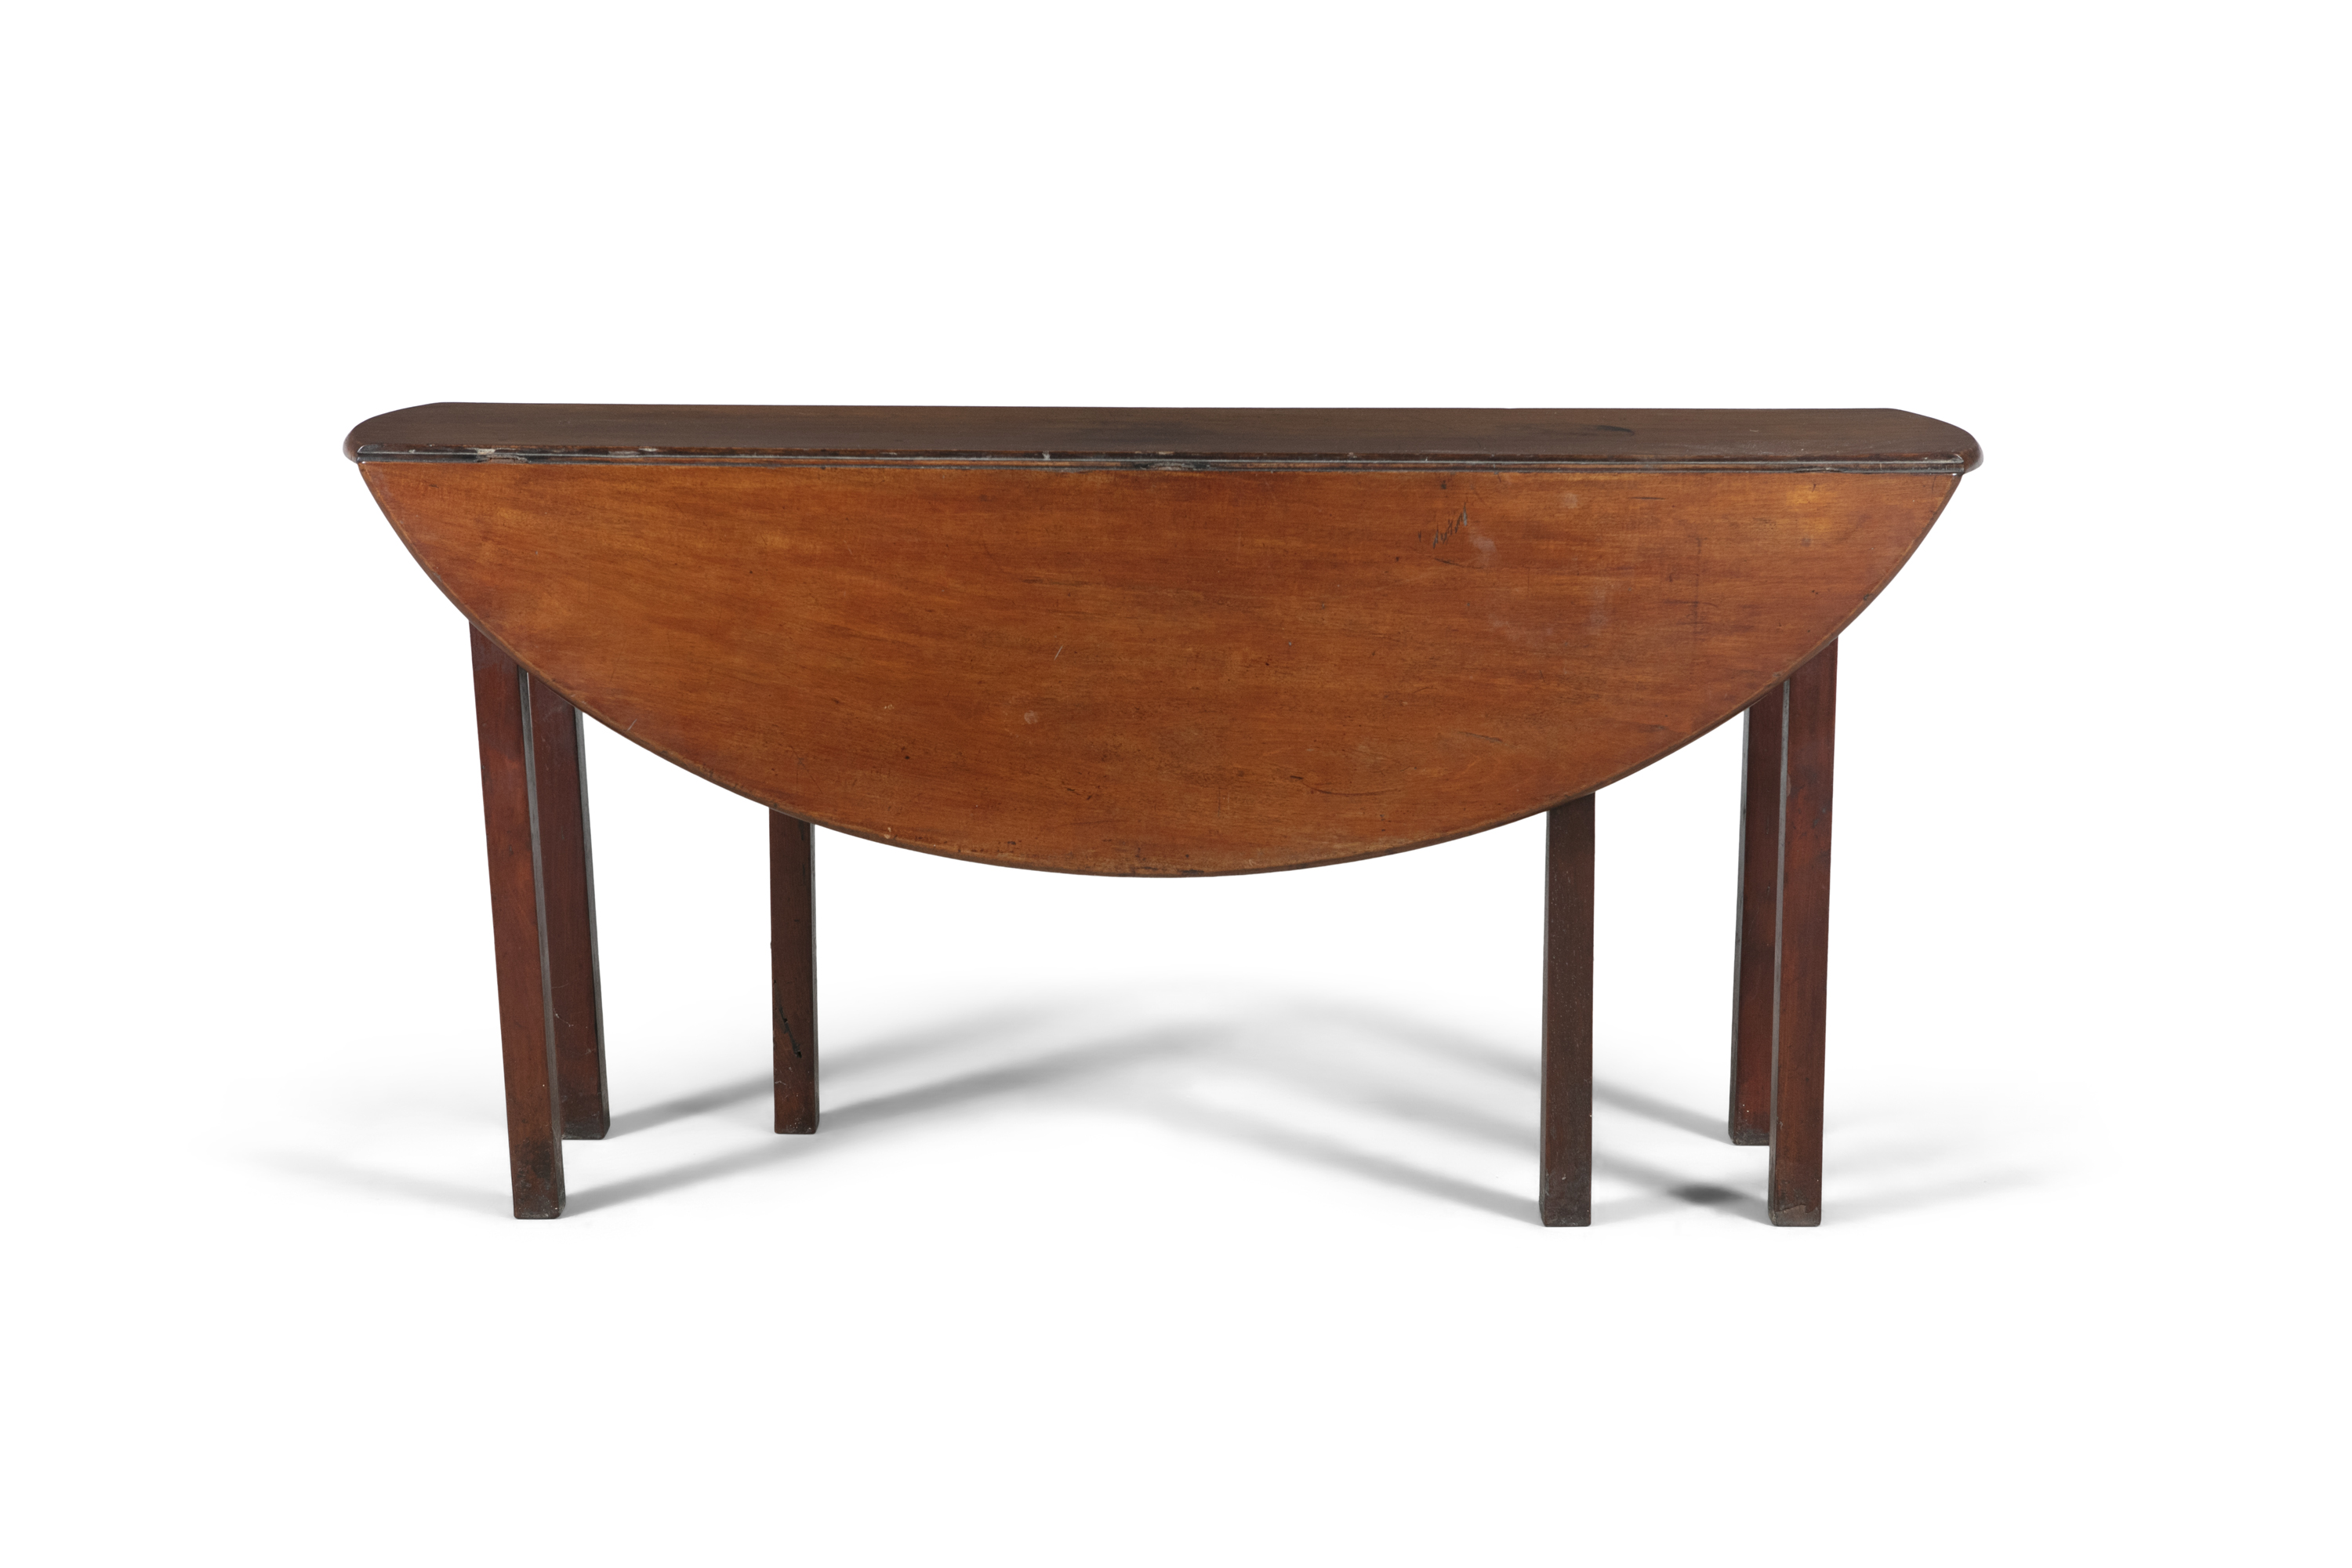 A GEORGIAN STYLE OVAL MAHOGANY HUNT TABLE, 19th century, with double drop leaves, on square gate leg - Image 2 of 3